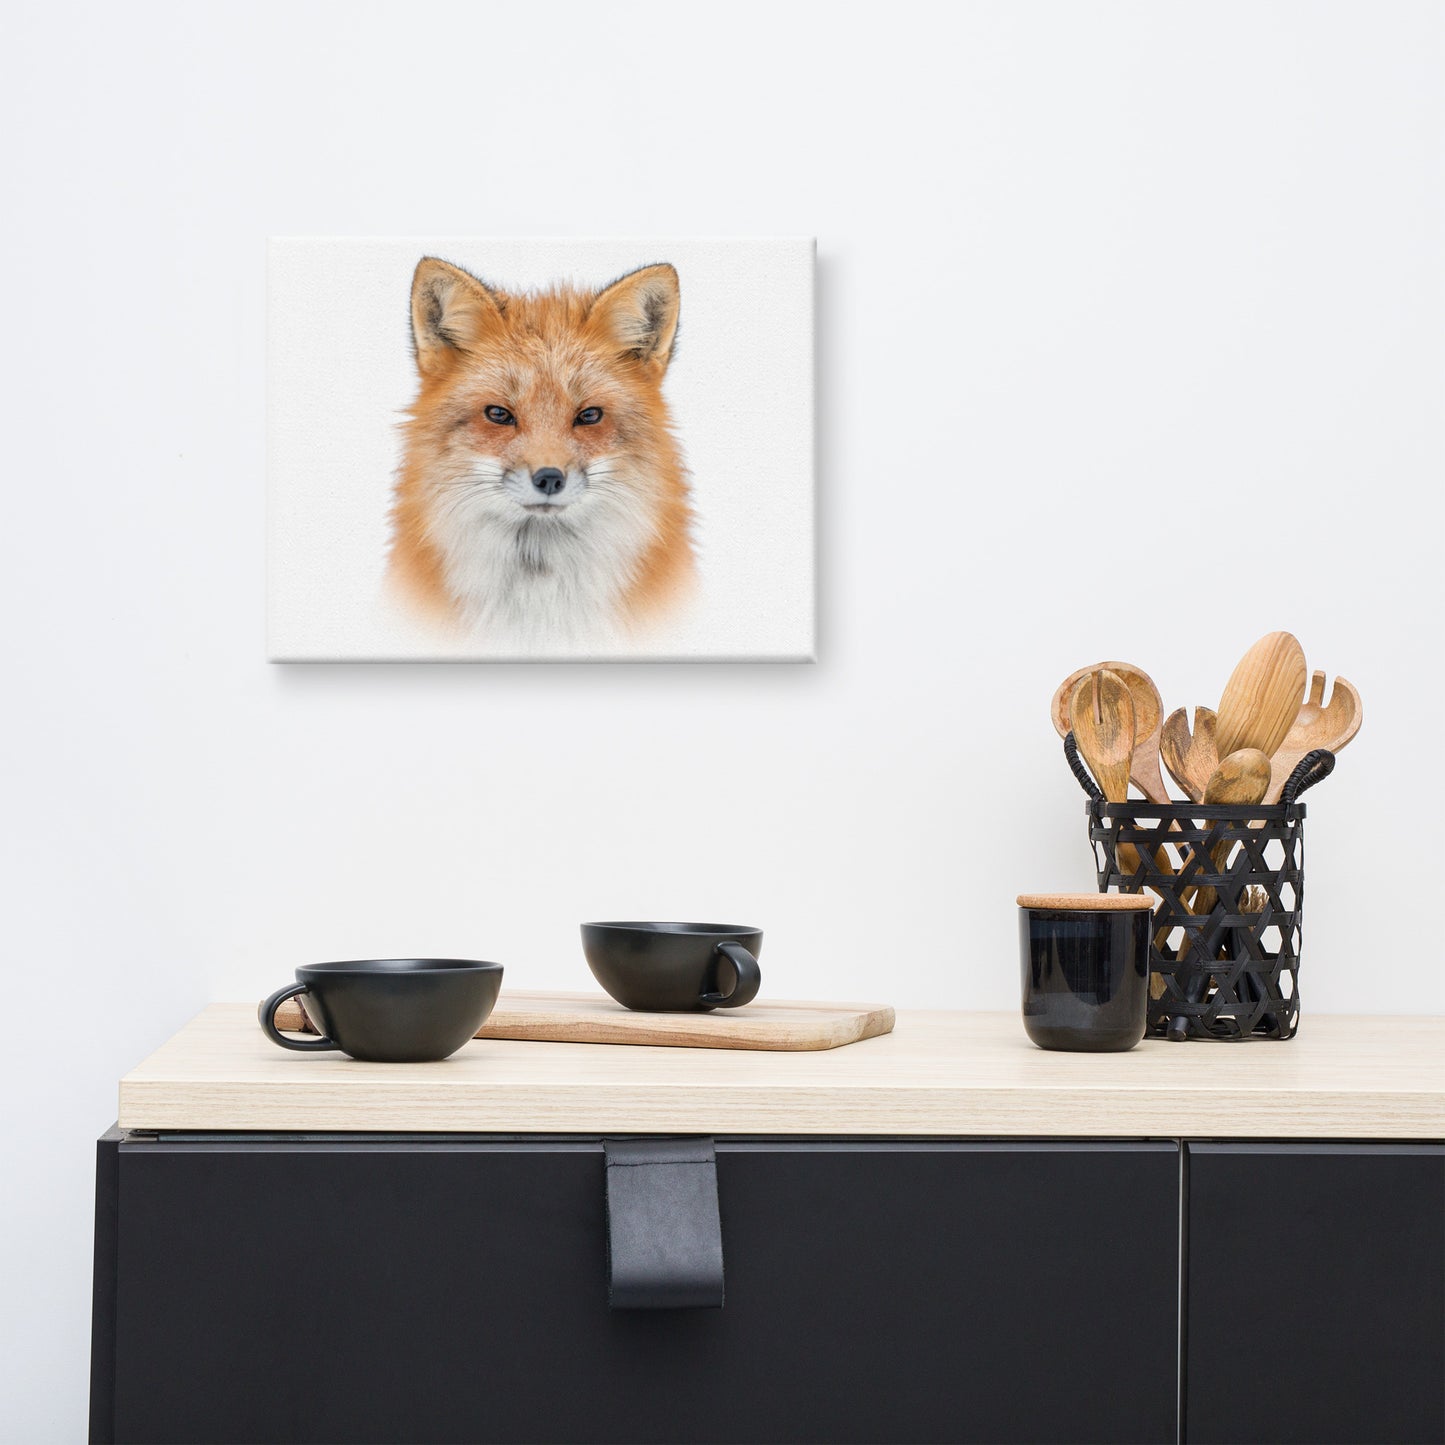 Young Red Fox Face On White Animal Wildlife Nature Canvas Wall Art Prints